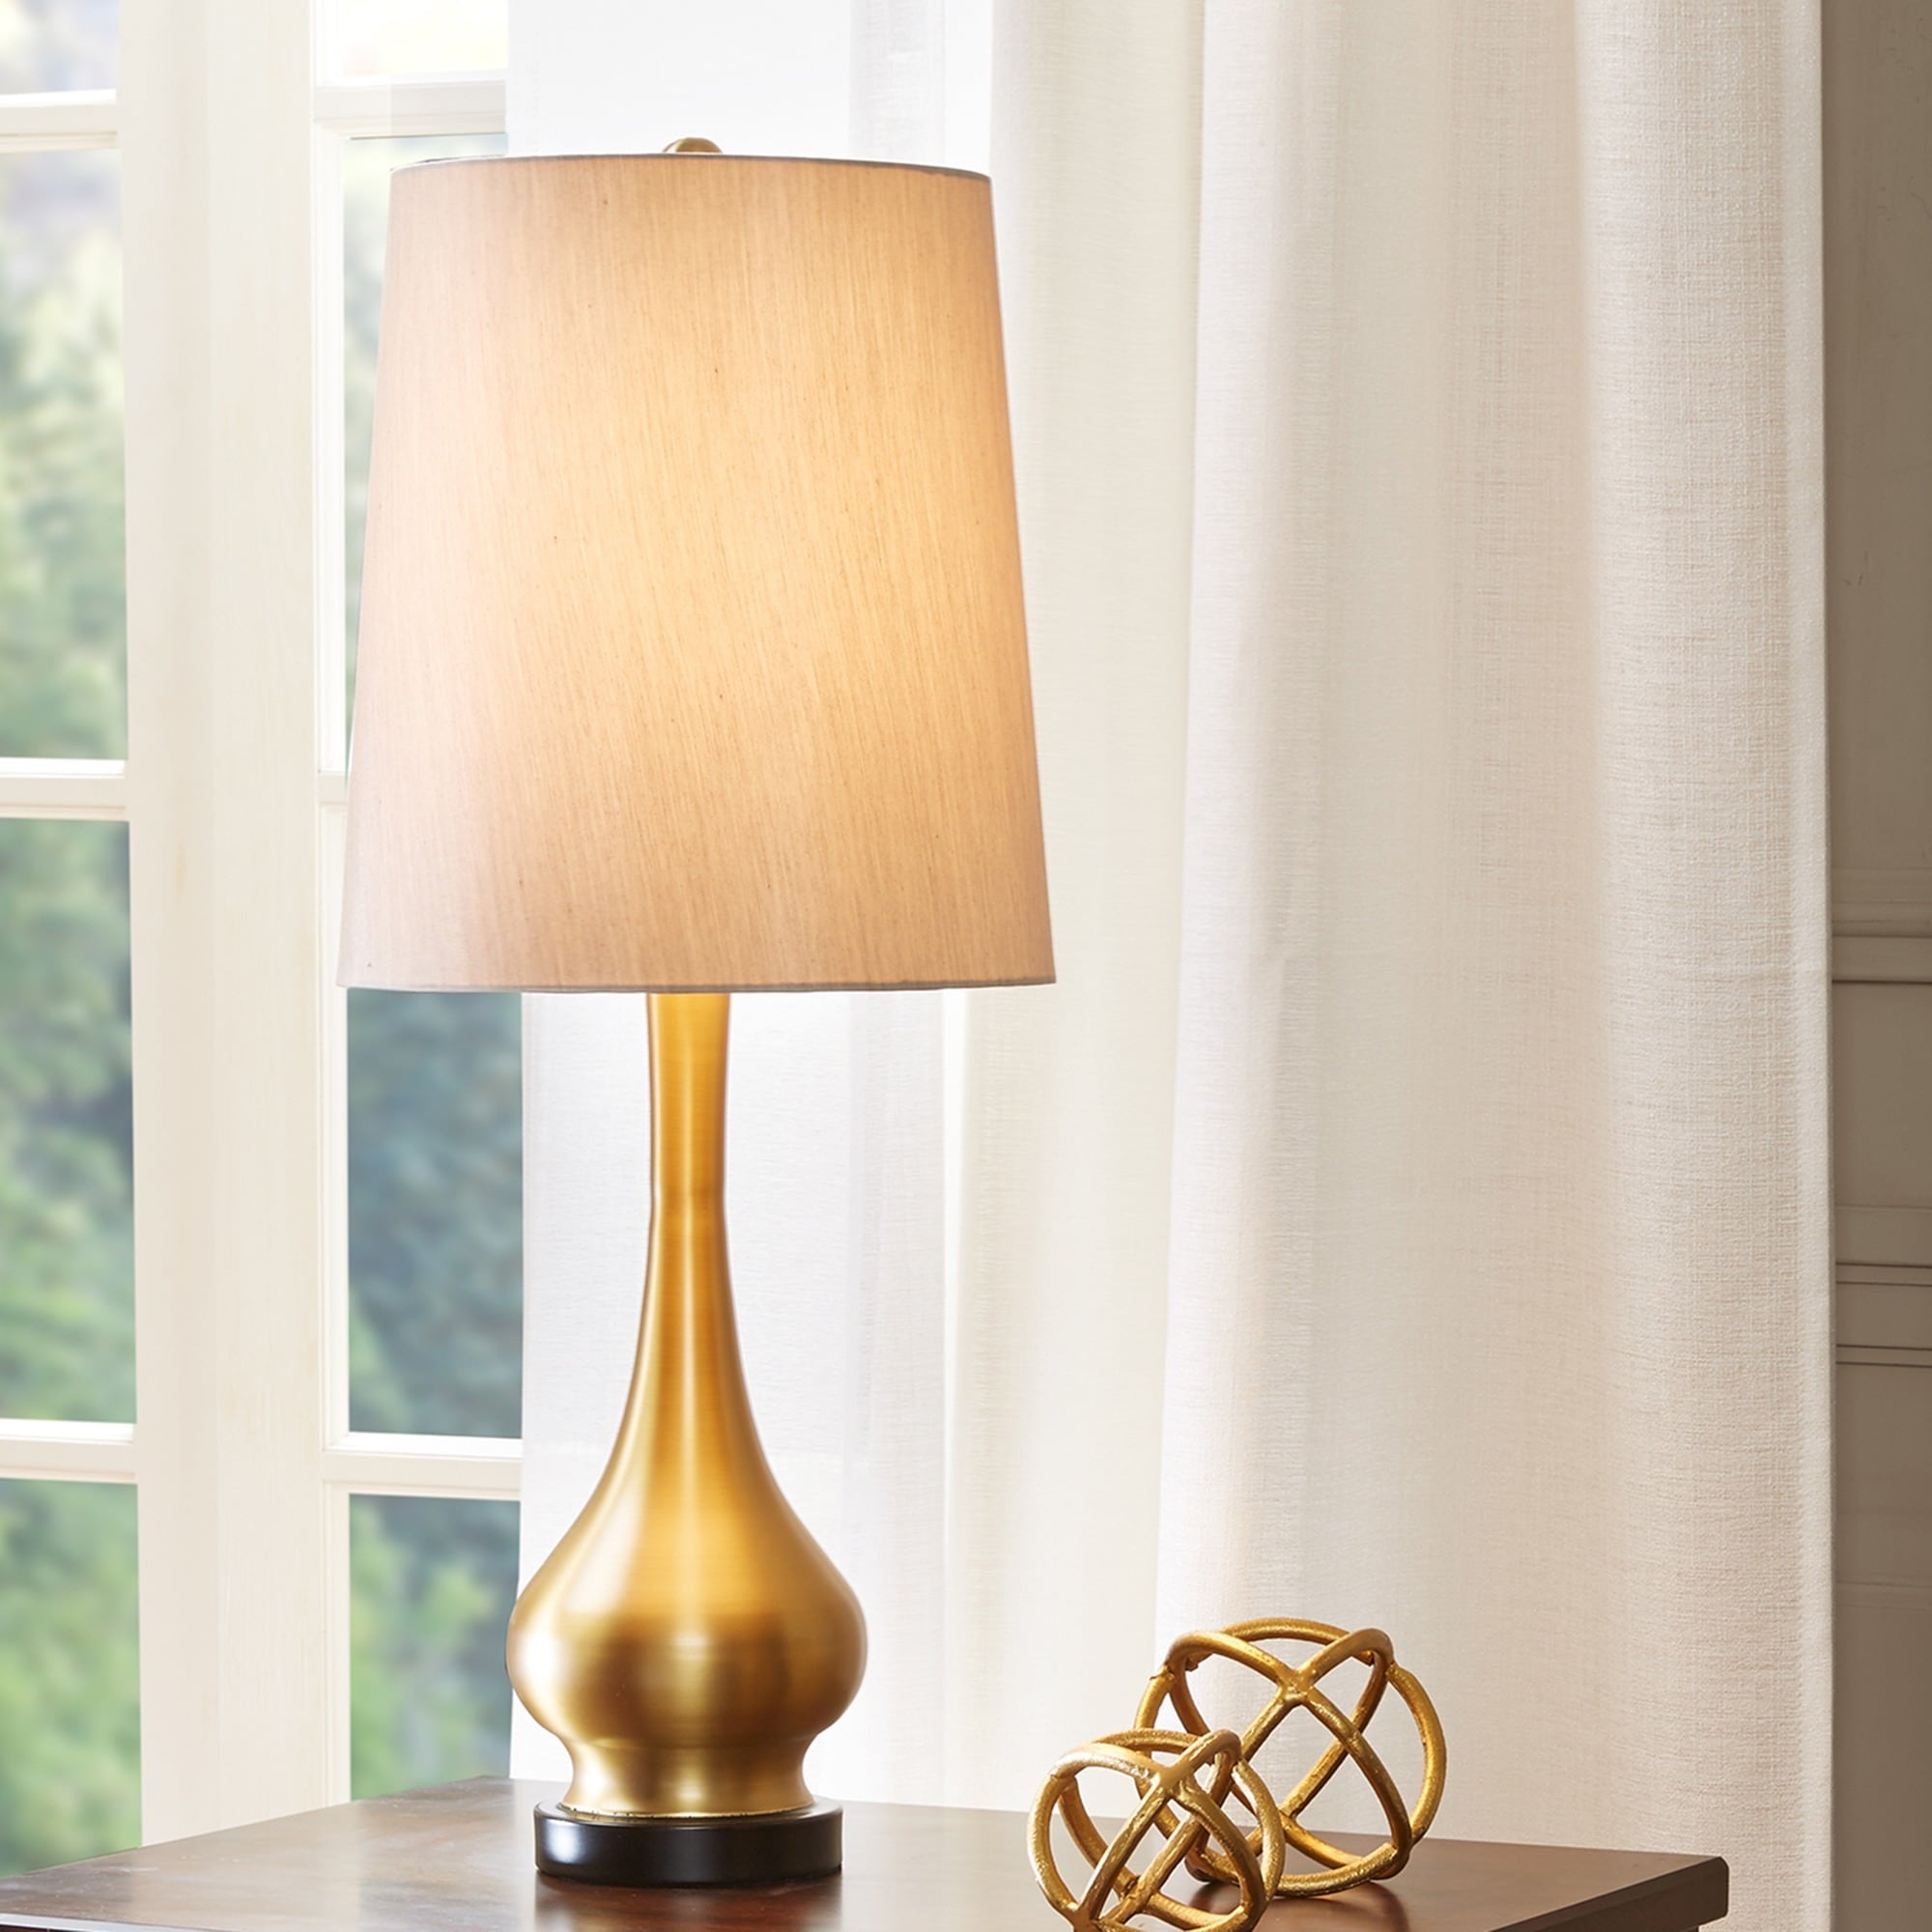 MADISON PARK SIGNATURE Lia Table Lamp Gold See Below MPS153-0001 